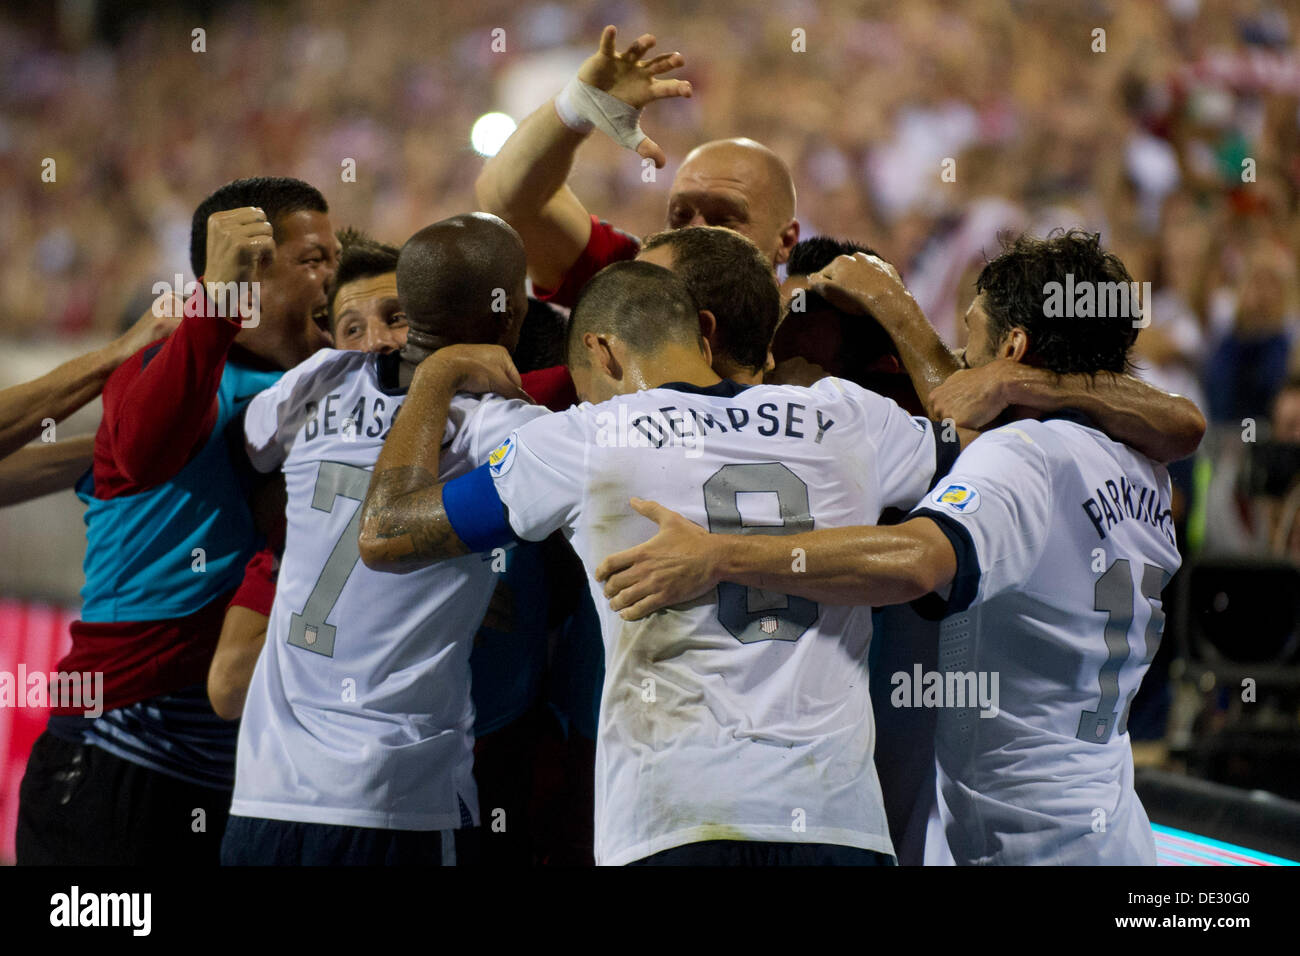 Columbus, Ohio, USA. 10th Sep, 2013. September 10, 2013: US Men's National Team forward Landon Donovan (10) is mobbed by US Men's National Team forward Clint Dempsey (8), US Men's National Team defender DaMarcus Beasley (7) and the rest of the team after scoring the second goal of the match during the U.S. Men's National Team vs. Mexico National Team- World Cup Qualifier match at Columbus Crew Stadium - Columbus, OH. The United States Men's National Team defeated The Mexico National Team 2-0 and clinched a spot for the World Cup in Brazil. Credit:  csm/Alamy Live News Stock Photo